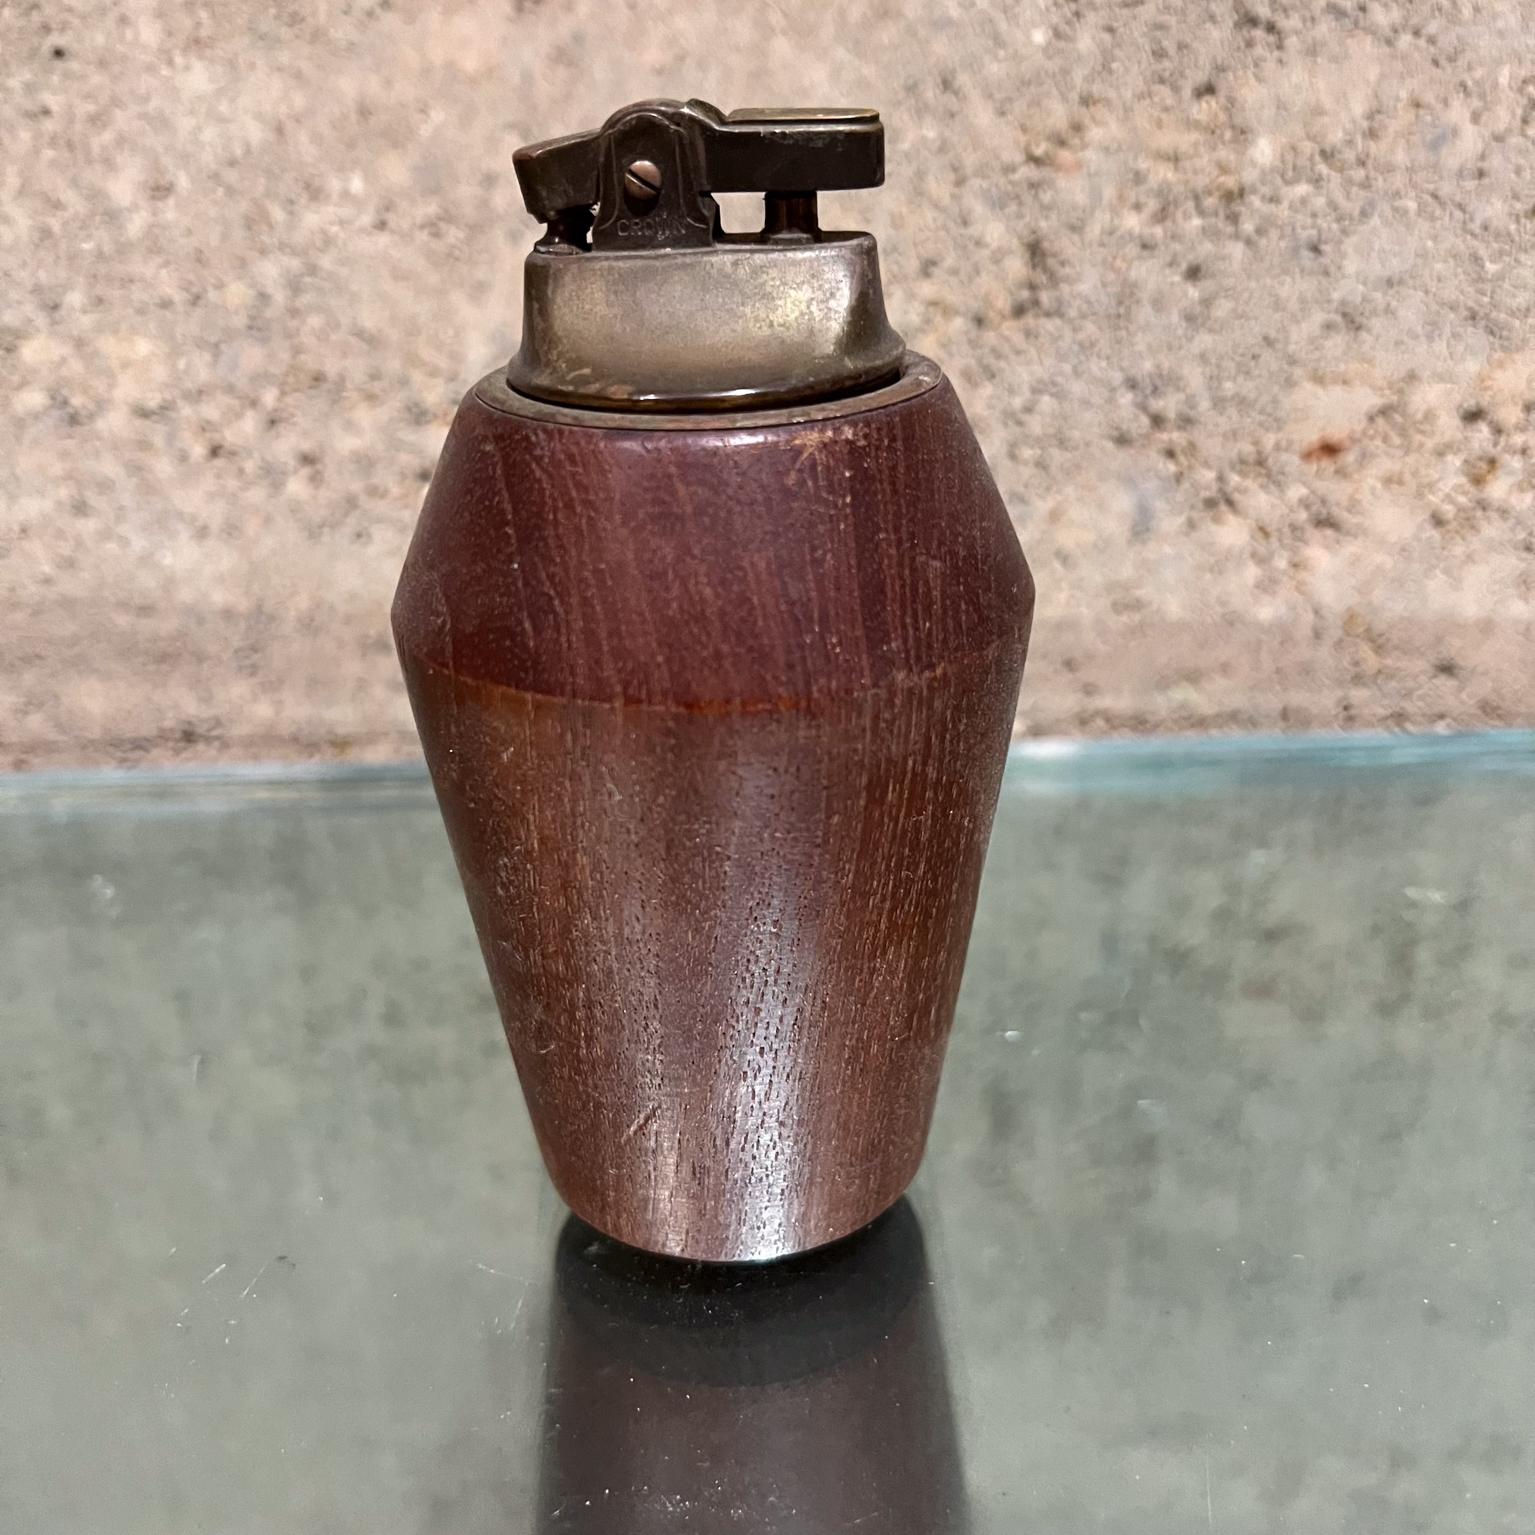 1960s Decorative Table Cigarette Lighter Teakwood BV NORWAY
Stamped by maker
3 diameter x 4.5 tall
Unable to test, likely will need servicing and or fluid.
Unrestored vintage condition.
Refer to images shown please.